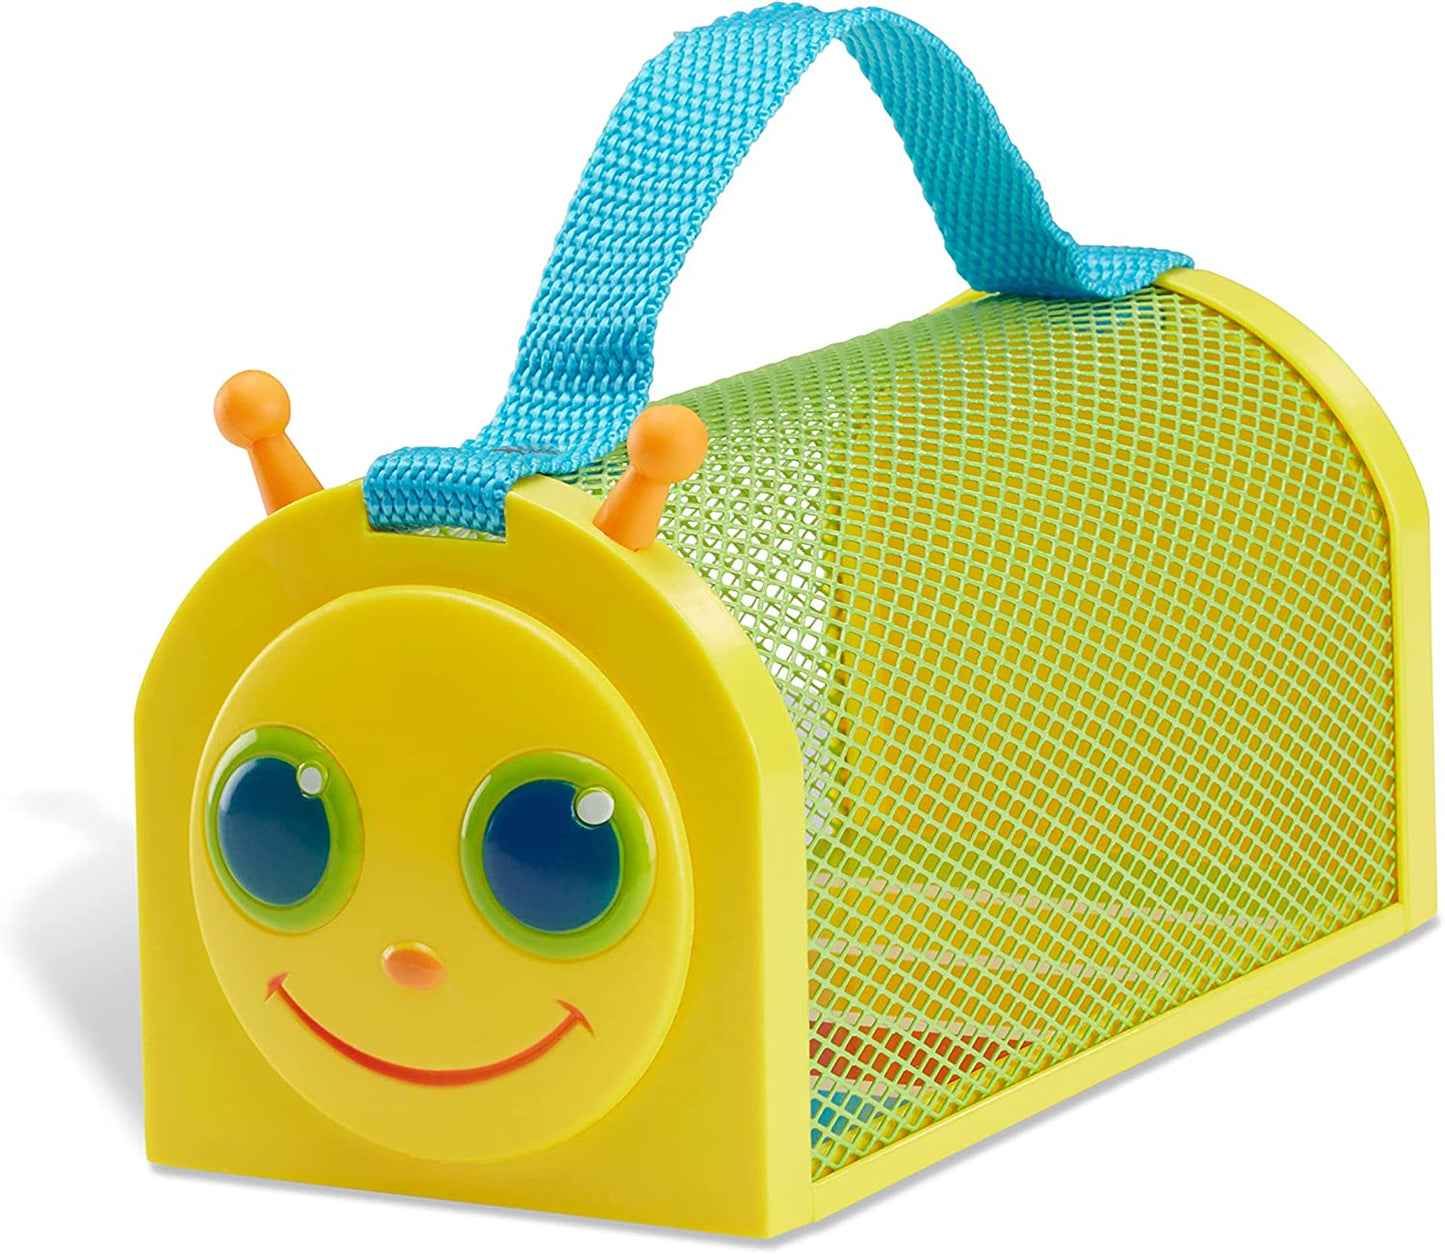 Melissa & Doug SK21300 #6703 Sunny Patch Giddy Buggy Bug House Toy With Carrying Handle and Easy-Access Door